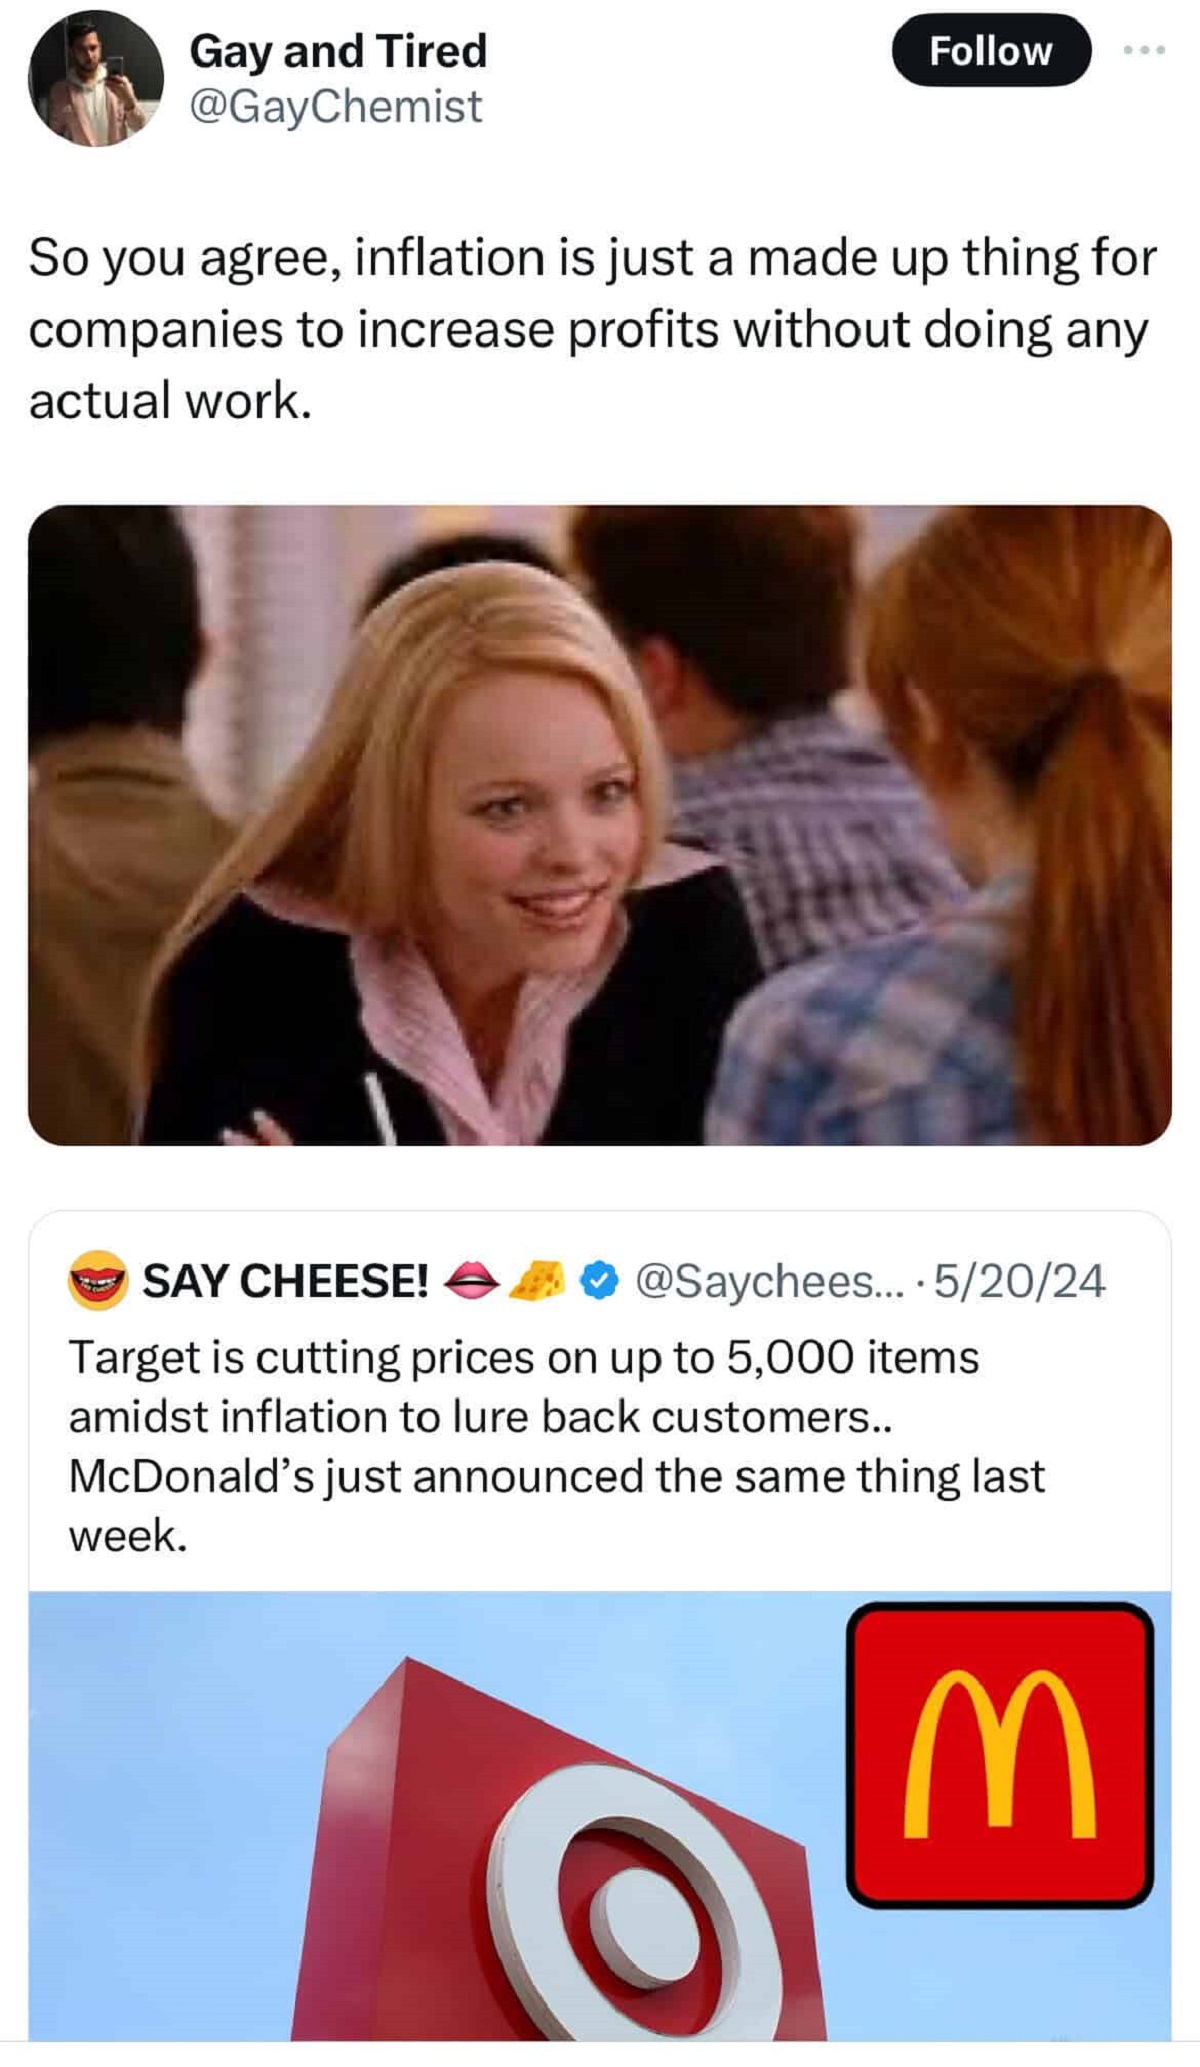 leave the country meme - Gay and Tired So you agree, inflation is just a made up thing for companies to increase profits without doing any actual work. Say Cheese! ... 52024 Target is cutting prices on up to 5,000 items amidst inflation to lure back custo